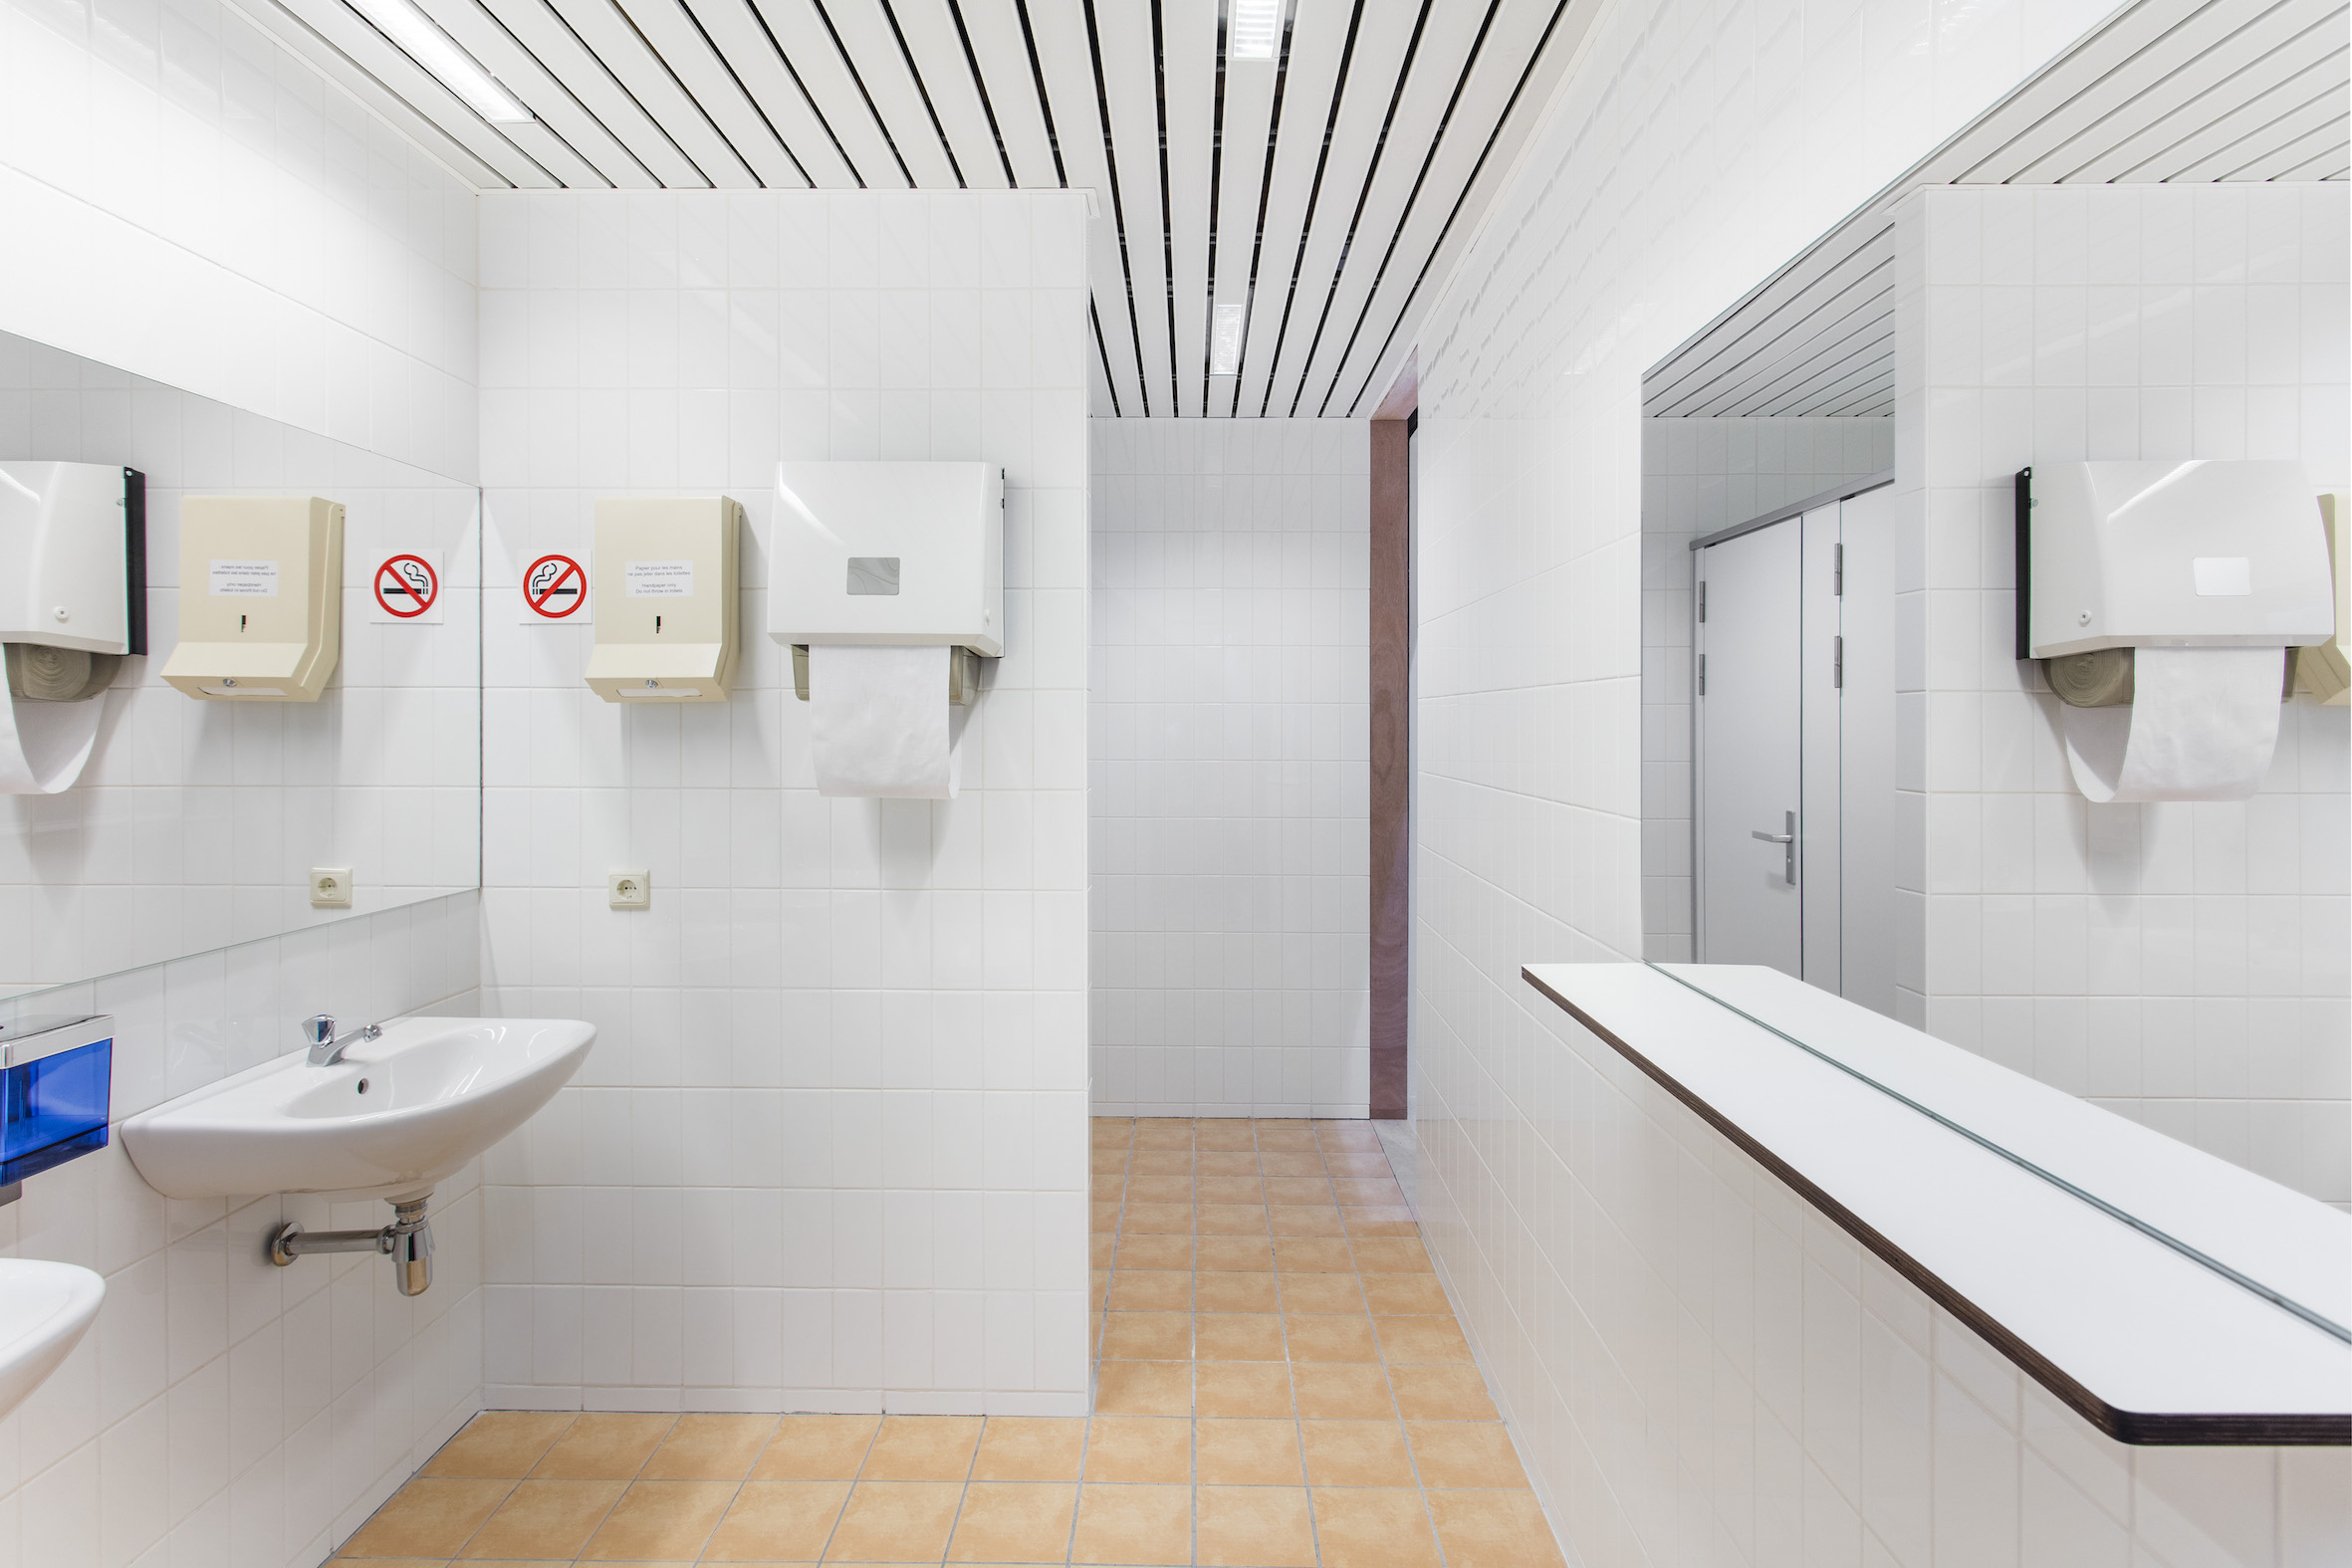 Superflex, Power Toilets:Council of the European Union, 2018. Power Toilets : Council of the European Union is designed in close collaboration with NEZU AYMO architects. Courtesy of the artist